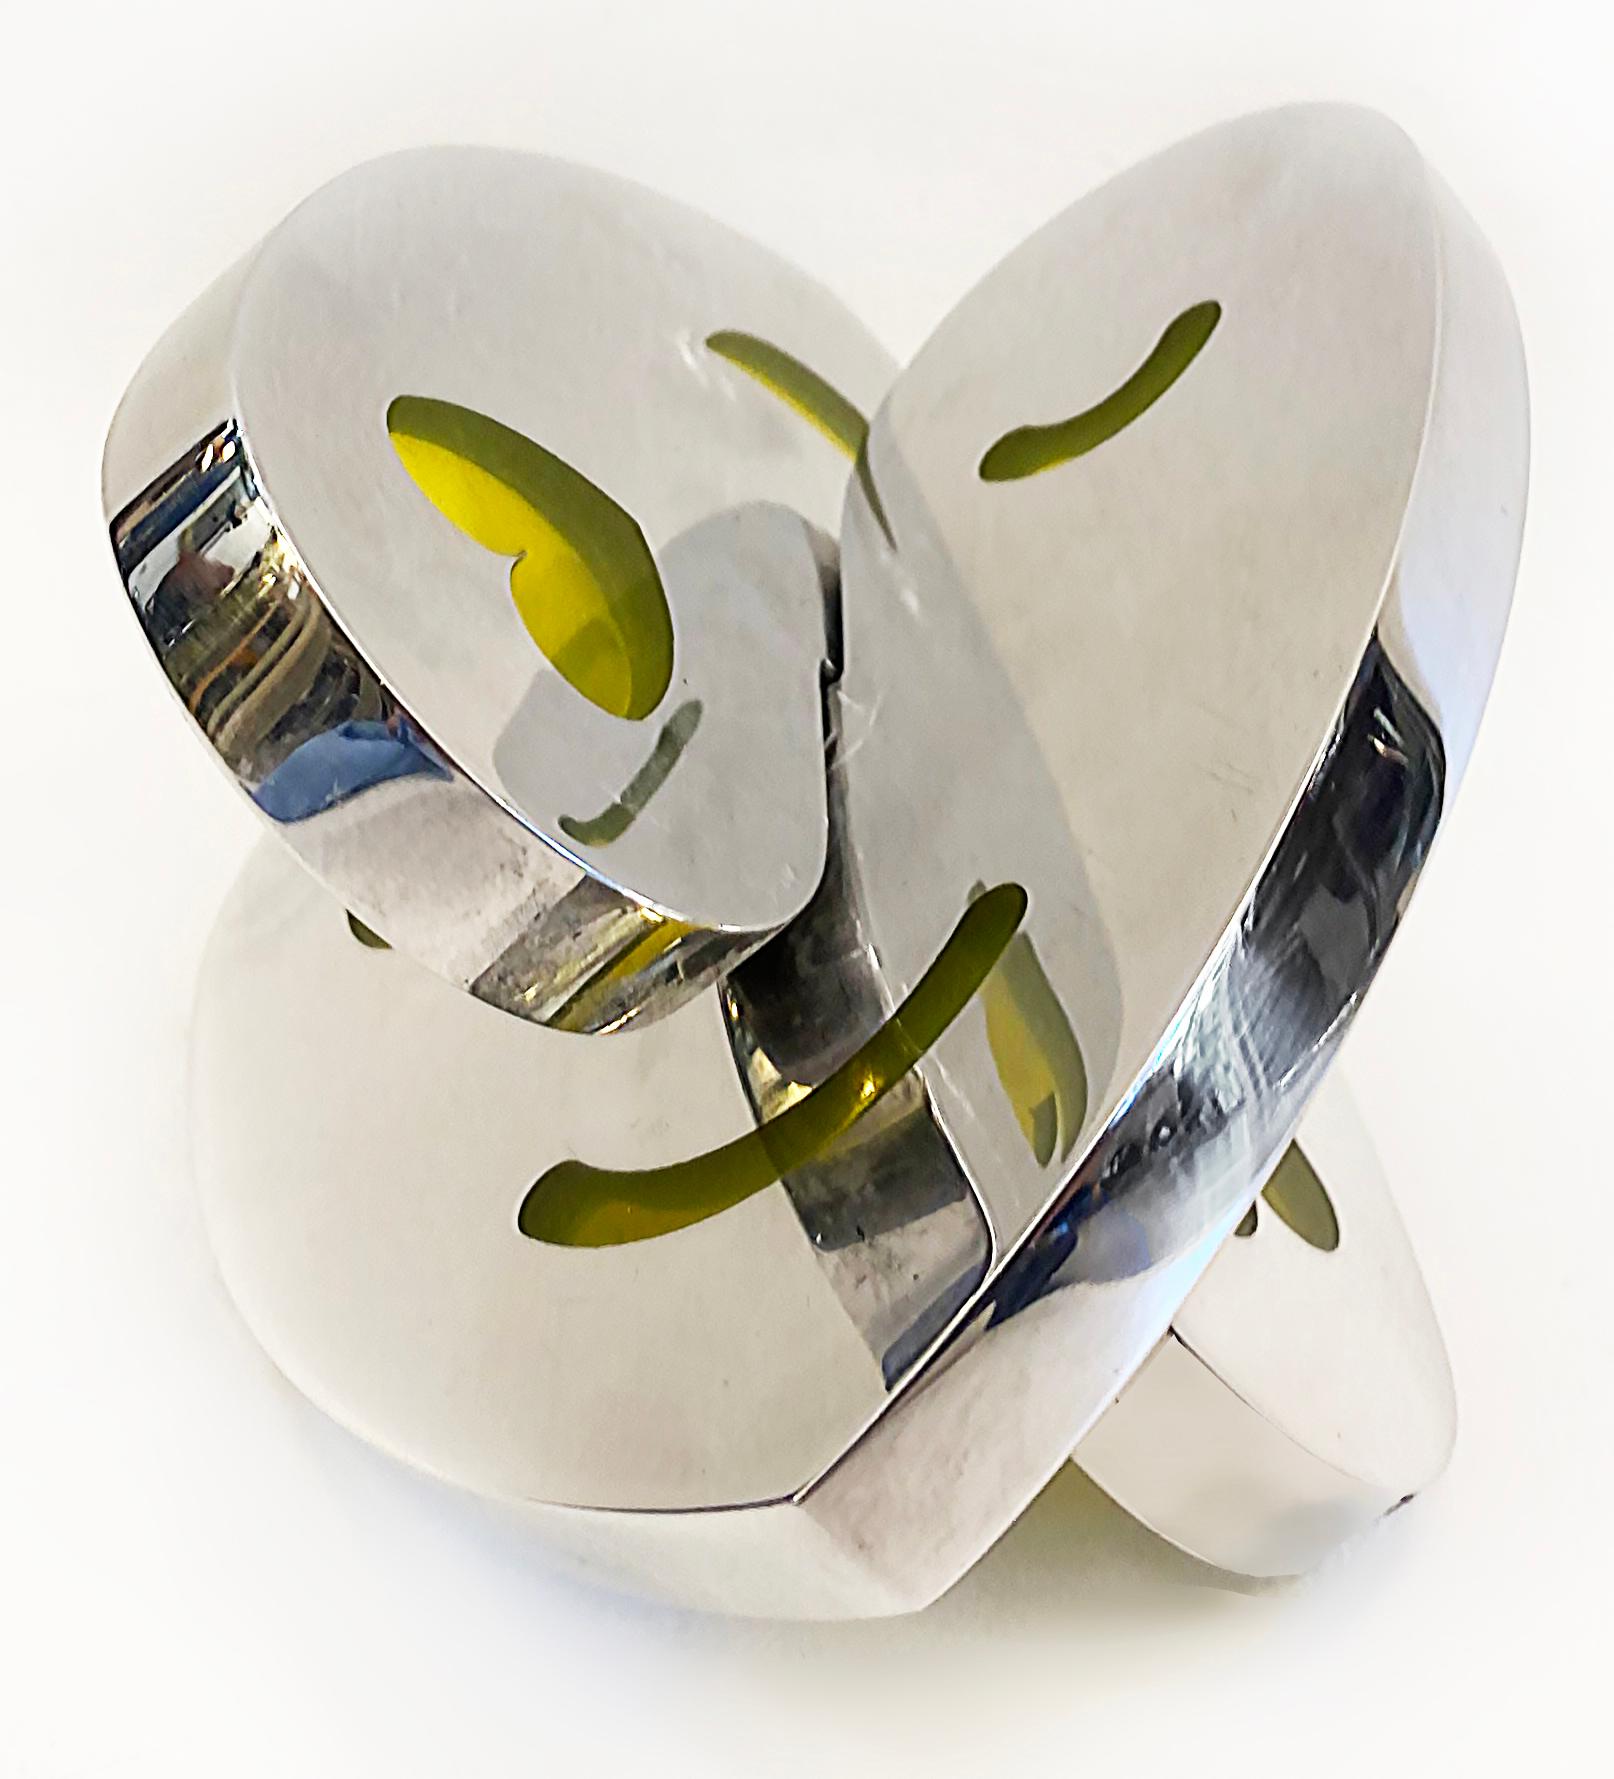 Polished Aluminum, Resin Interlocking Hearts Sculpture by Michael Gitter For Sale 2